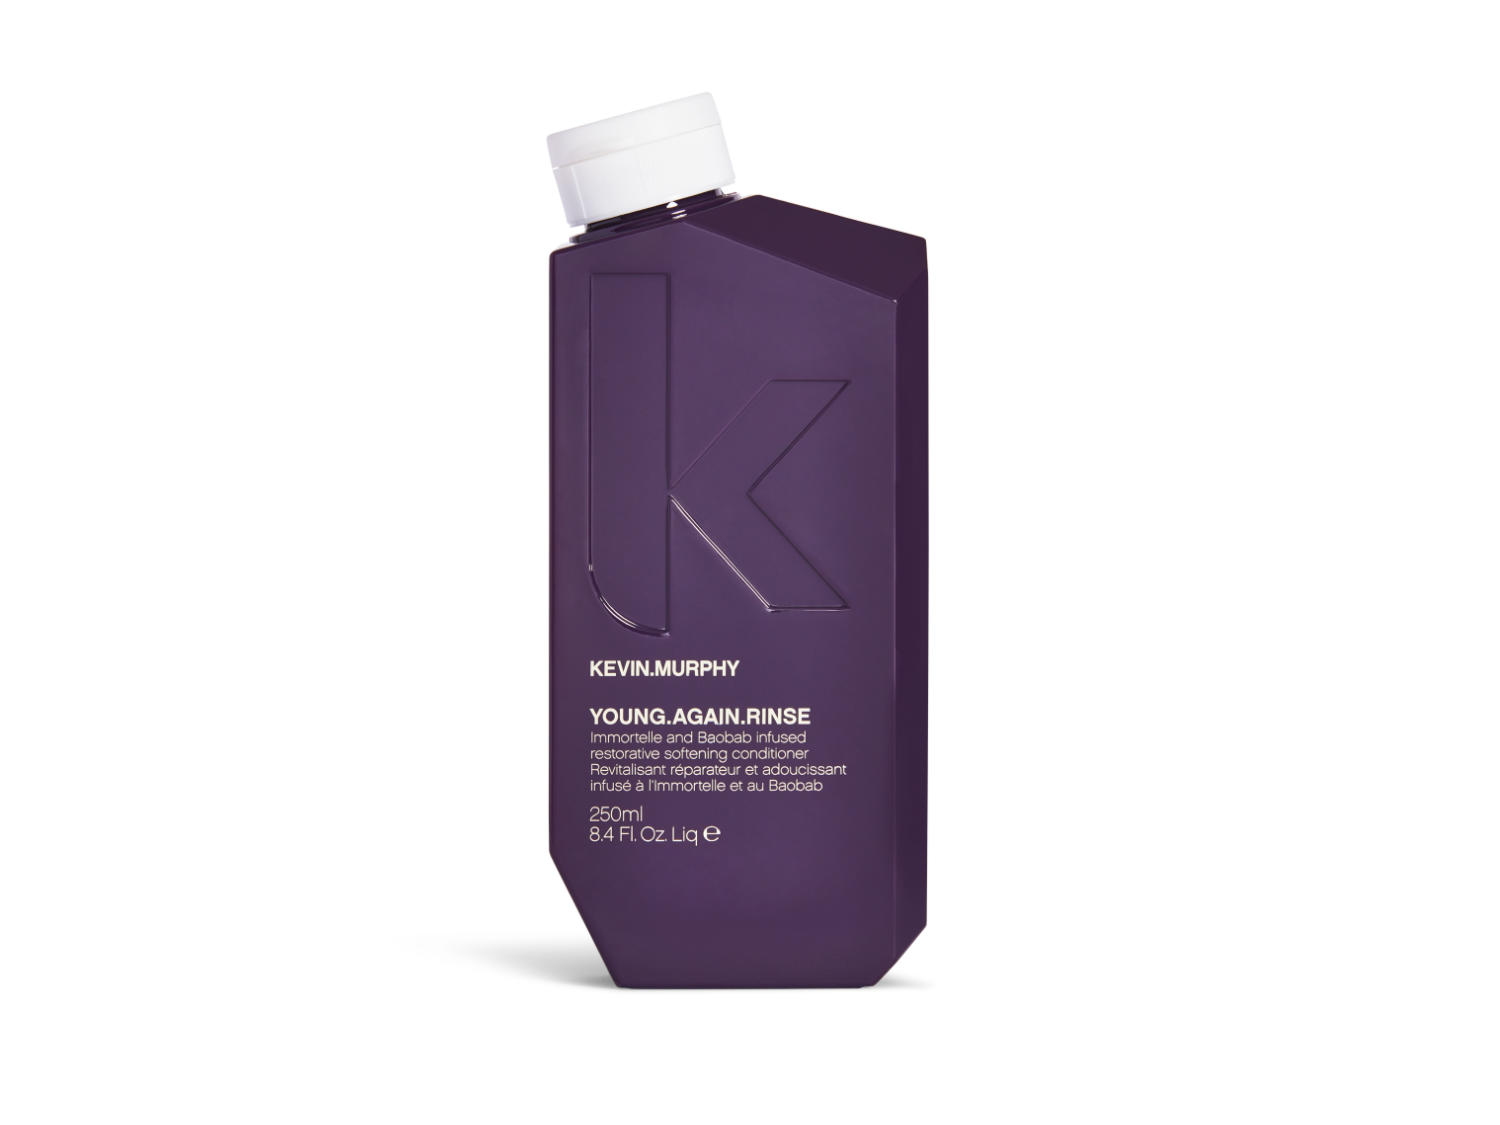 Arma Beauty - Kevin Murphy - YOUNG.AGAIN.RINSE